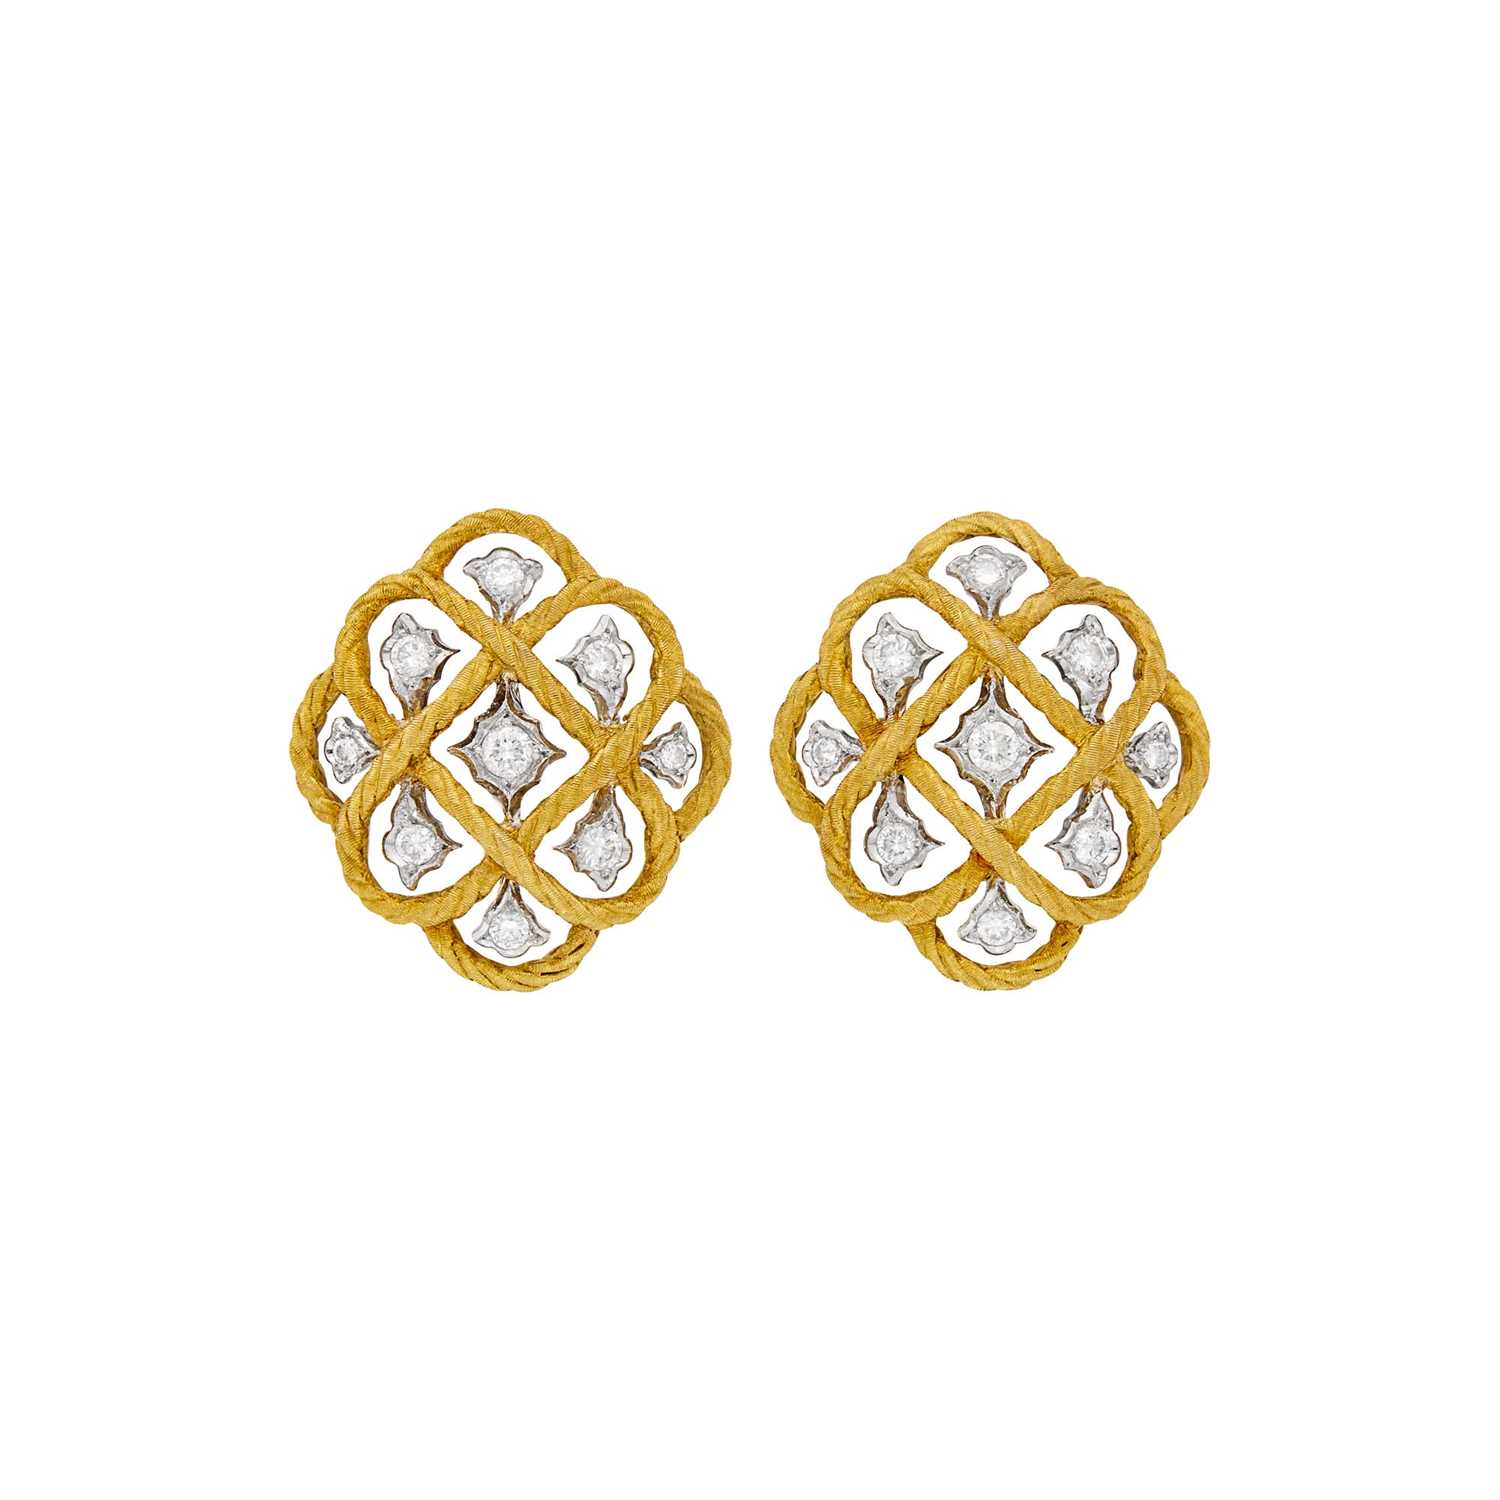 Lot 10 - Gianmaria Buccellati Pair of Two-Color Gold and Diamond 'Étoilée' Earrings